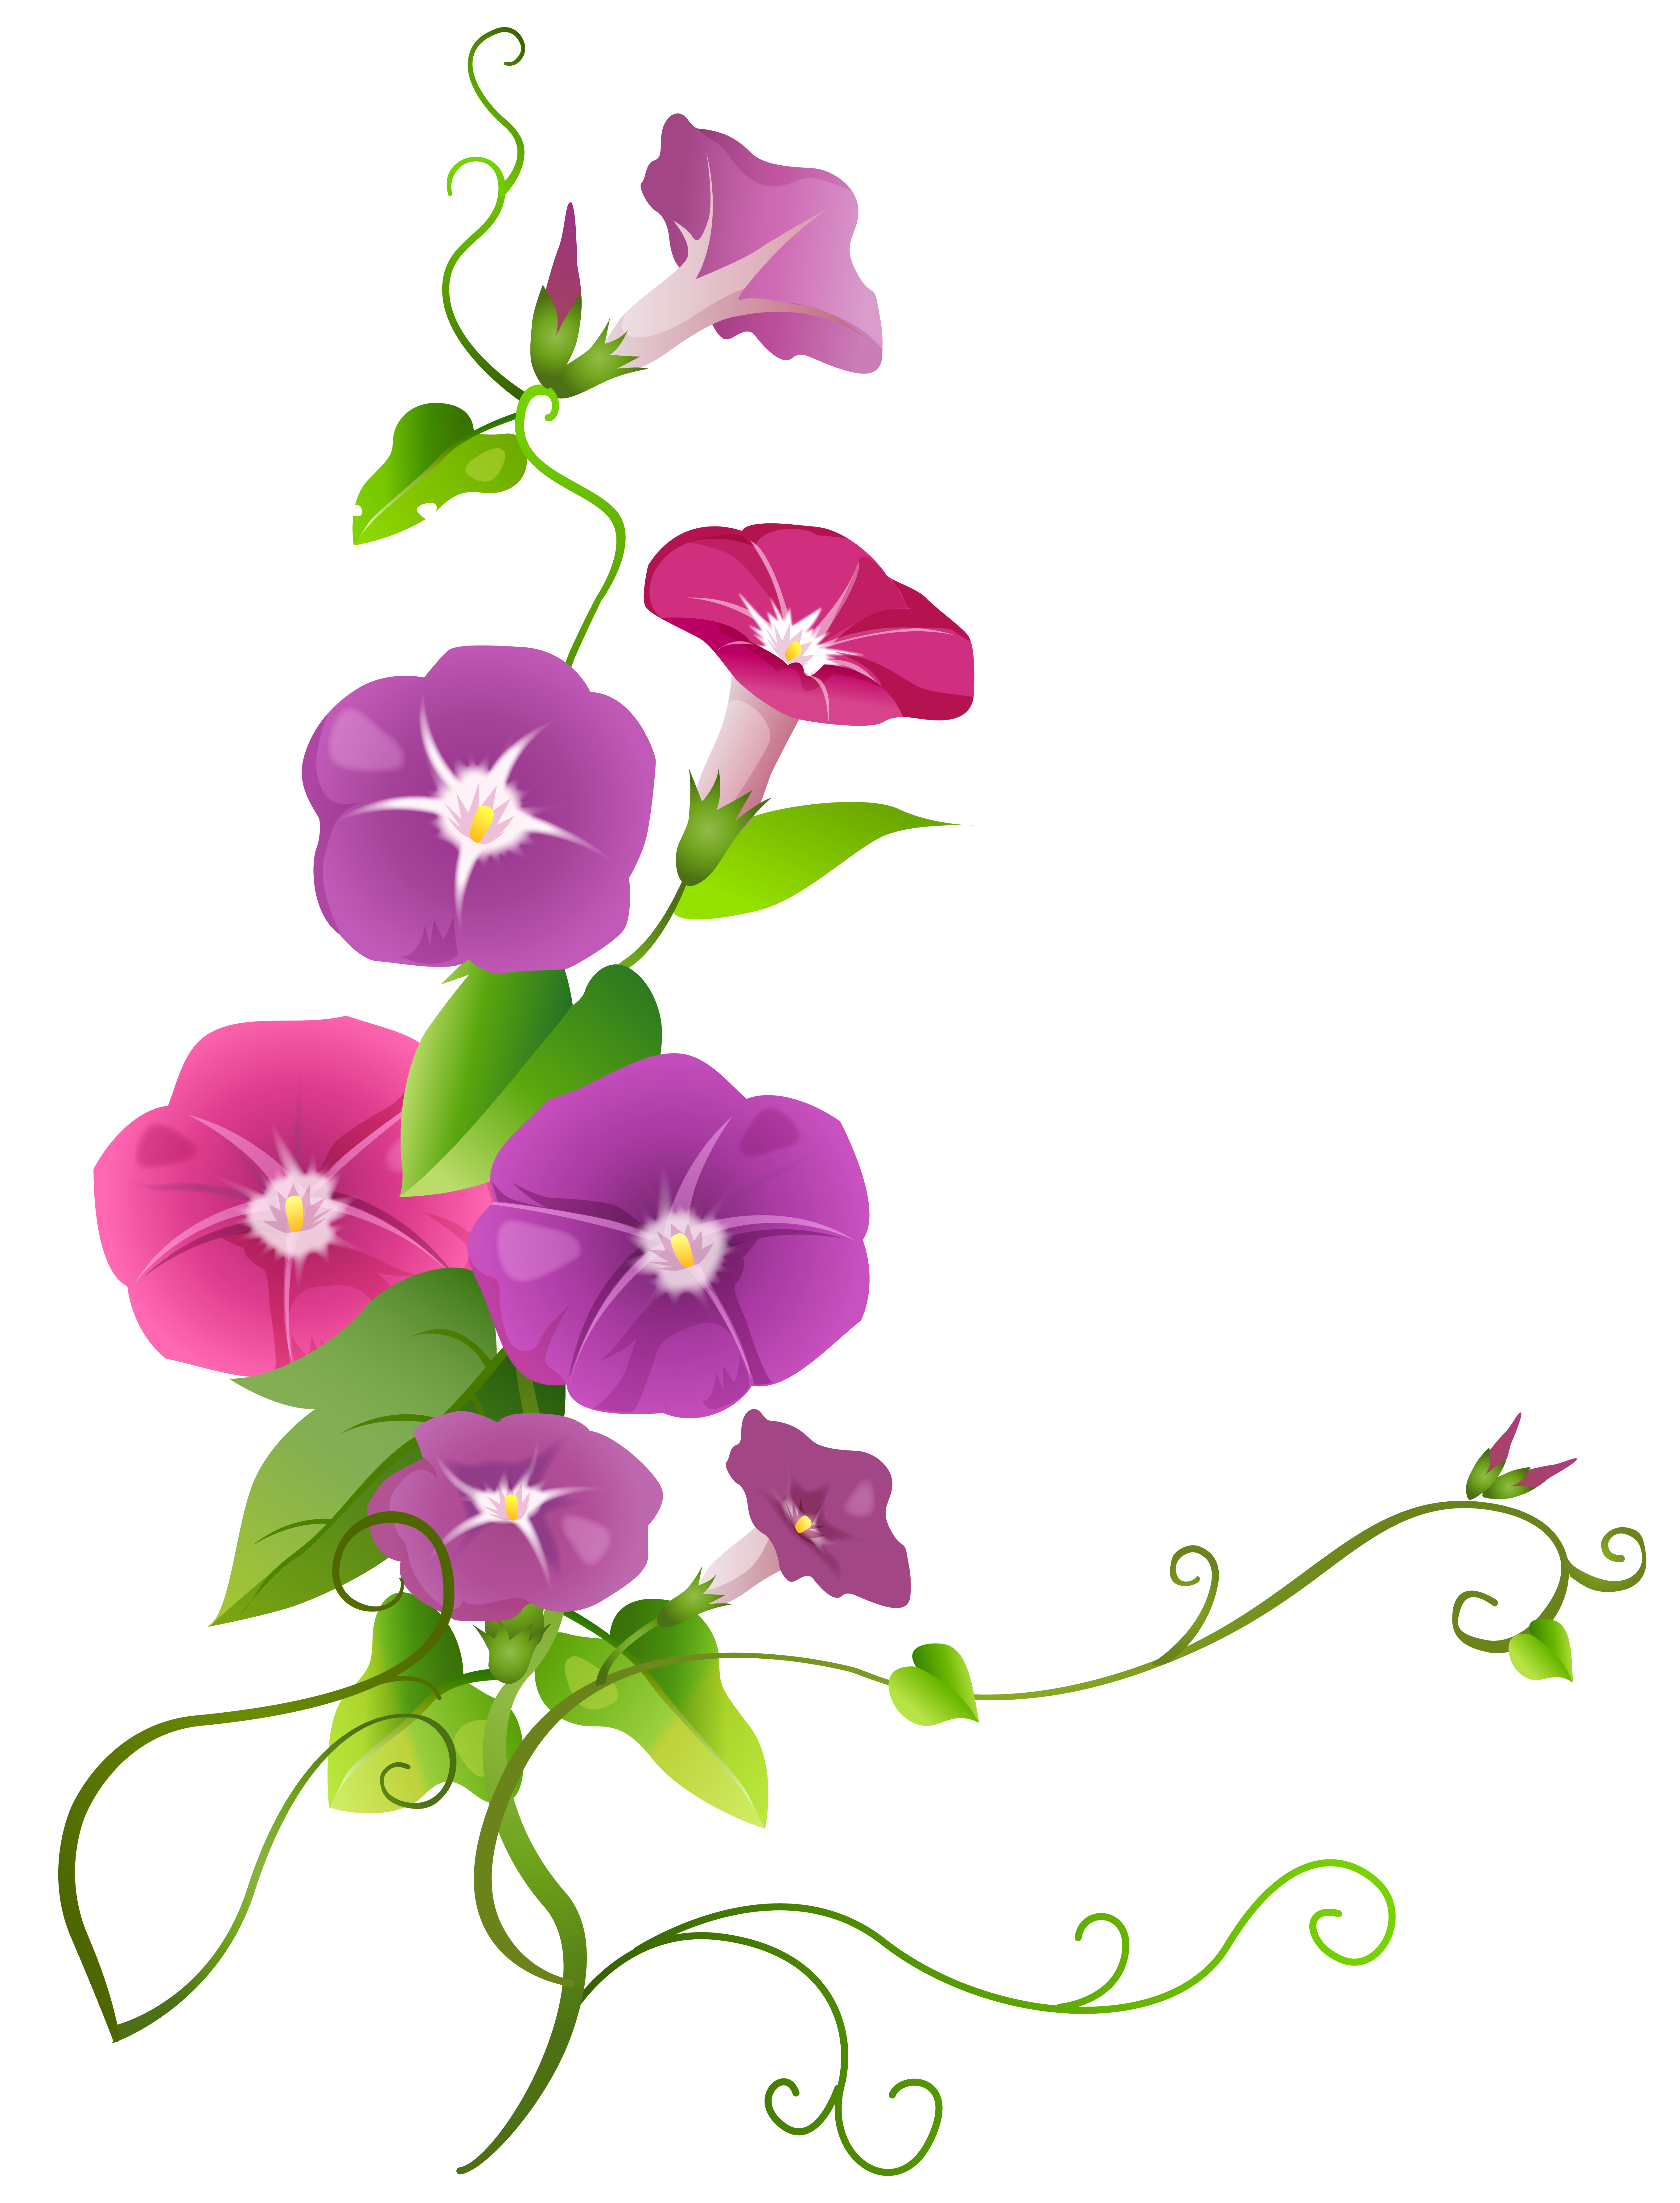 flower clipart with transparent background - photo #36